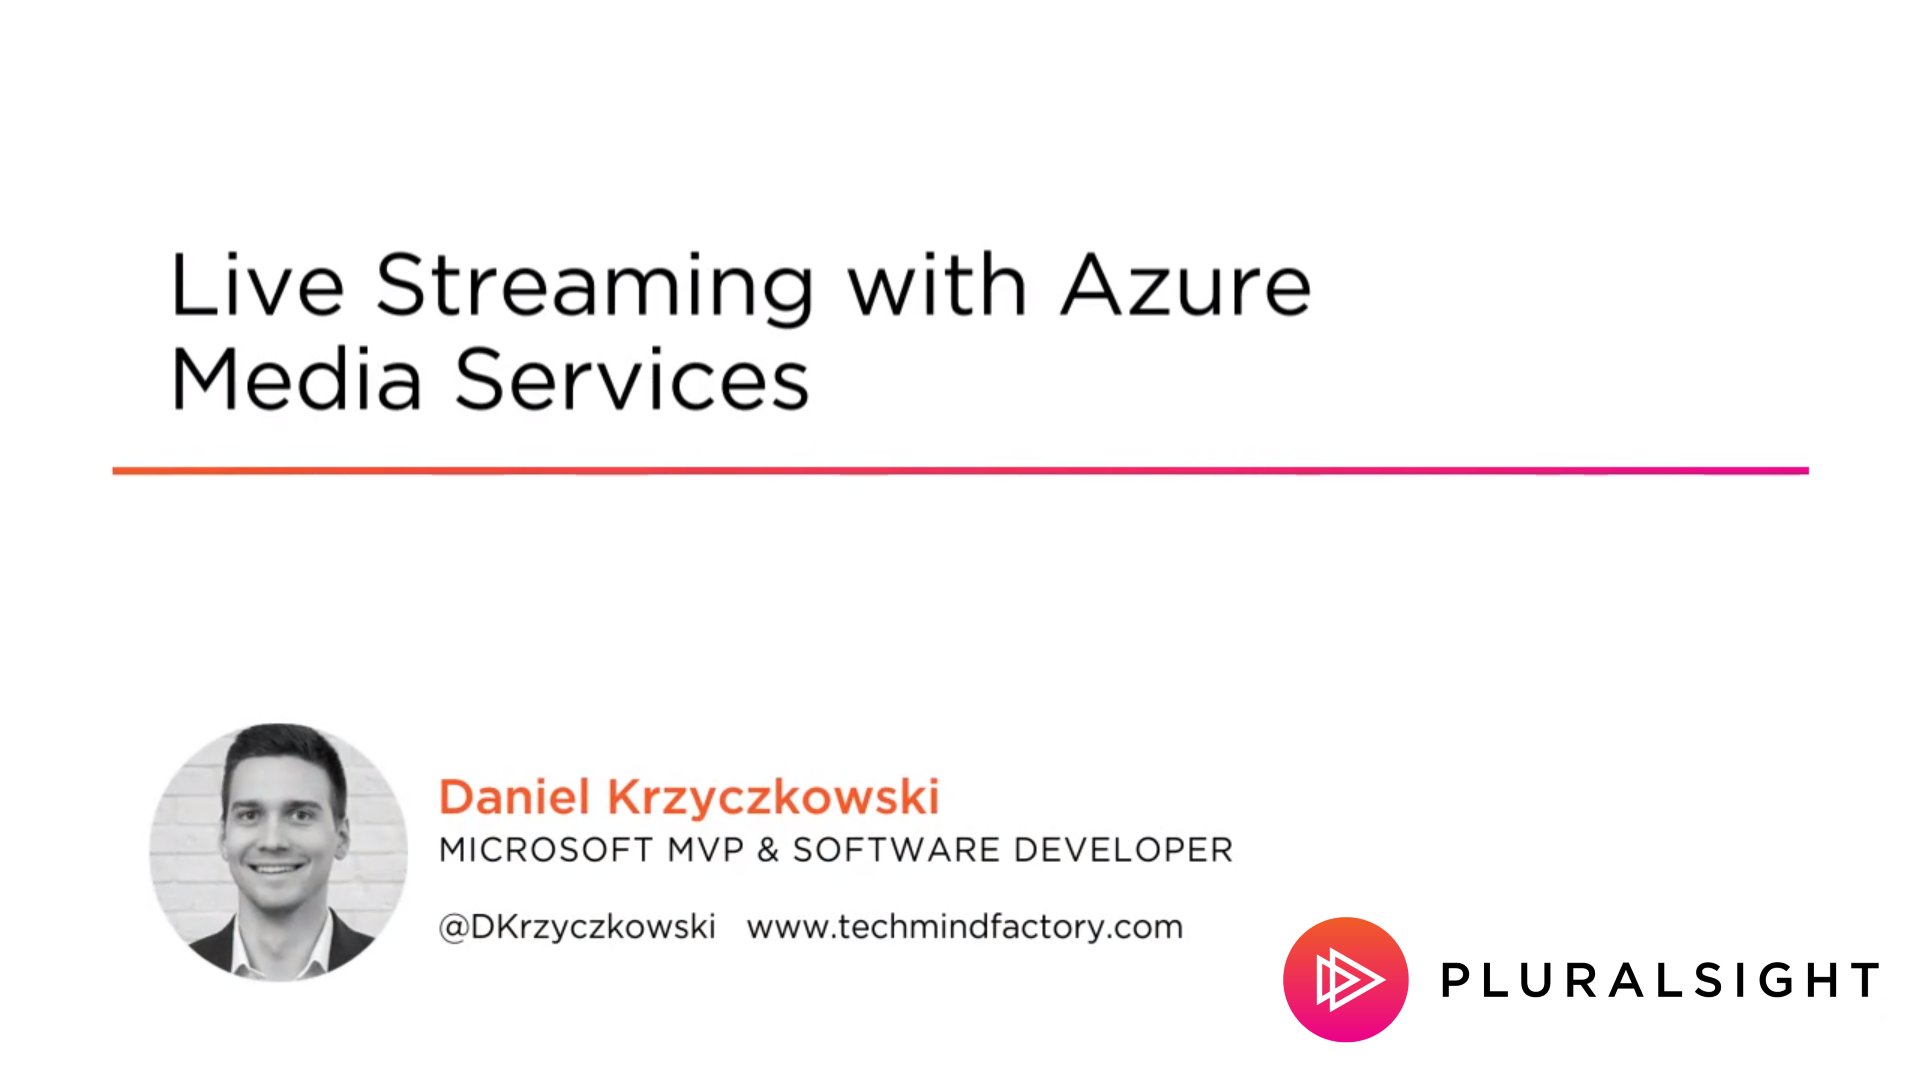 Live streaming with Azure Media Services